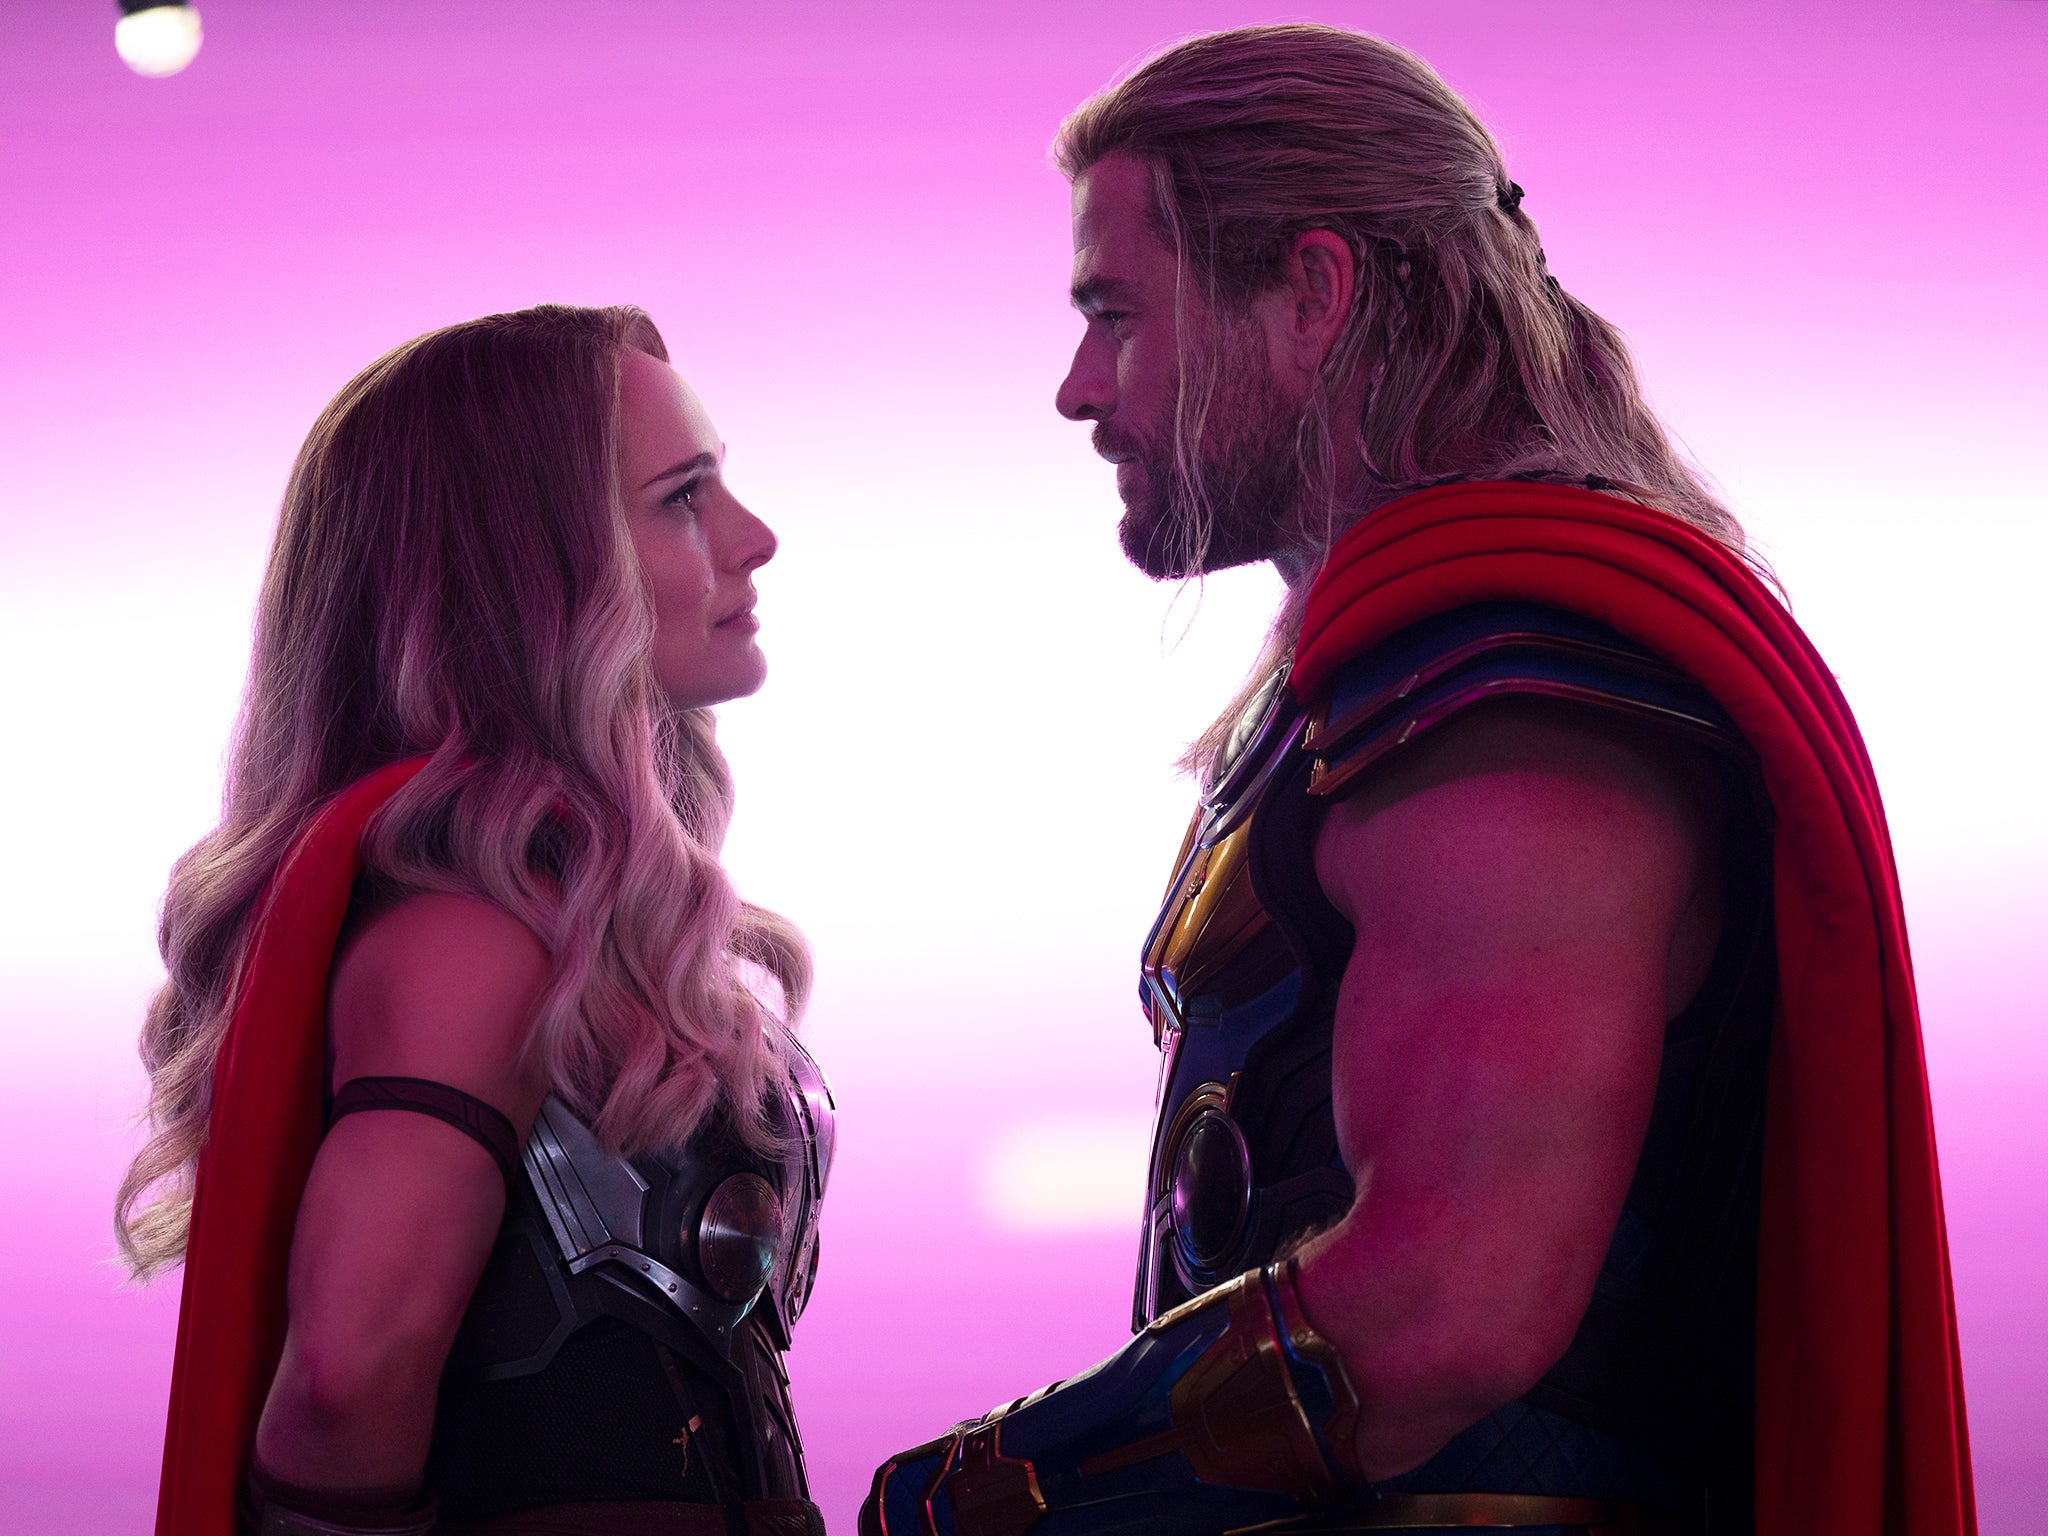 Natalie Portman and Chris Hemsworth in ‘Thor: Love and Thunder'